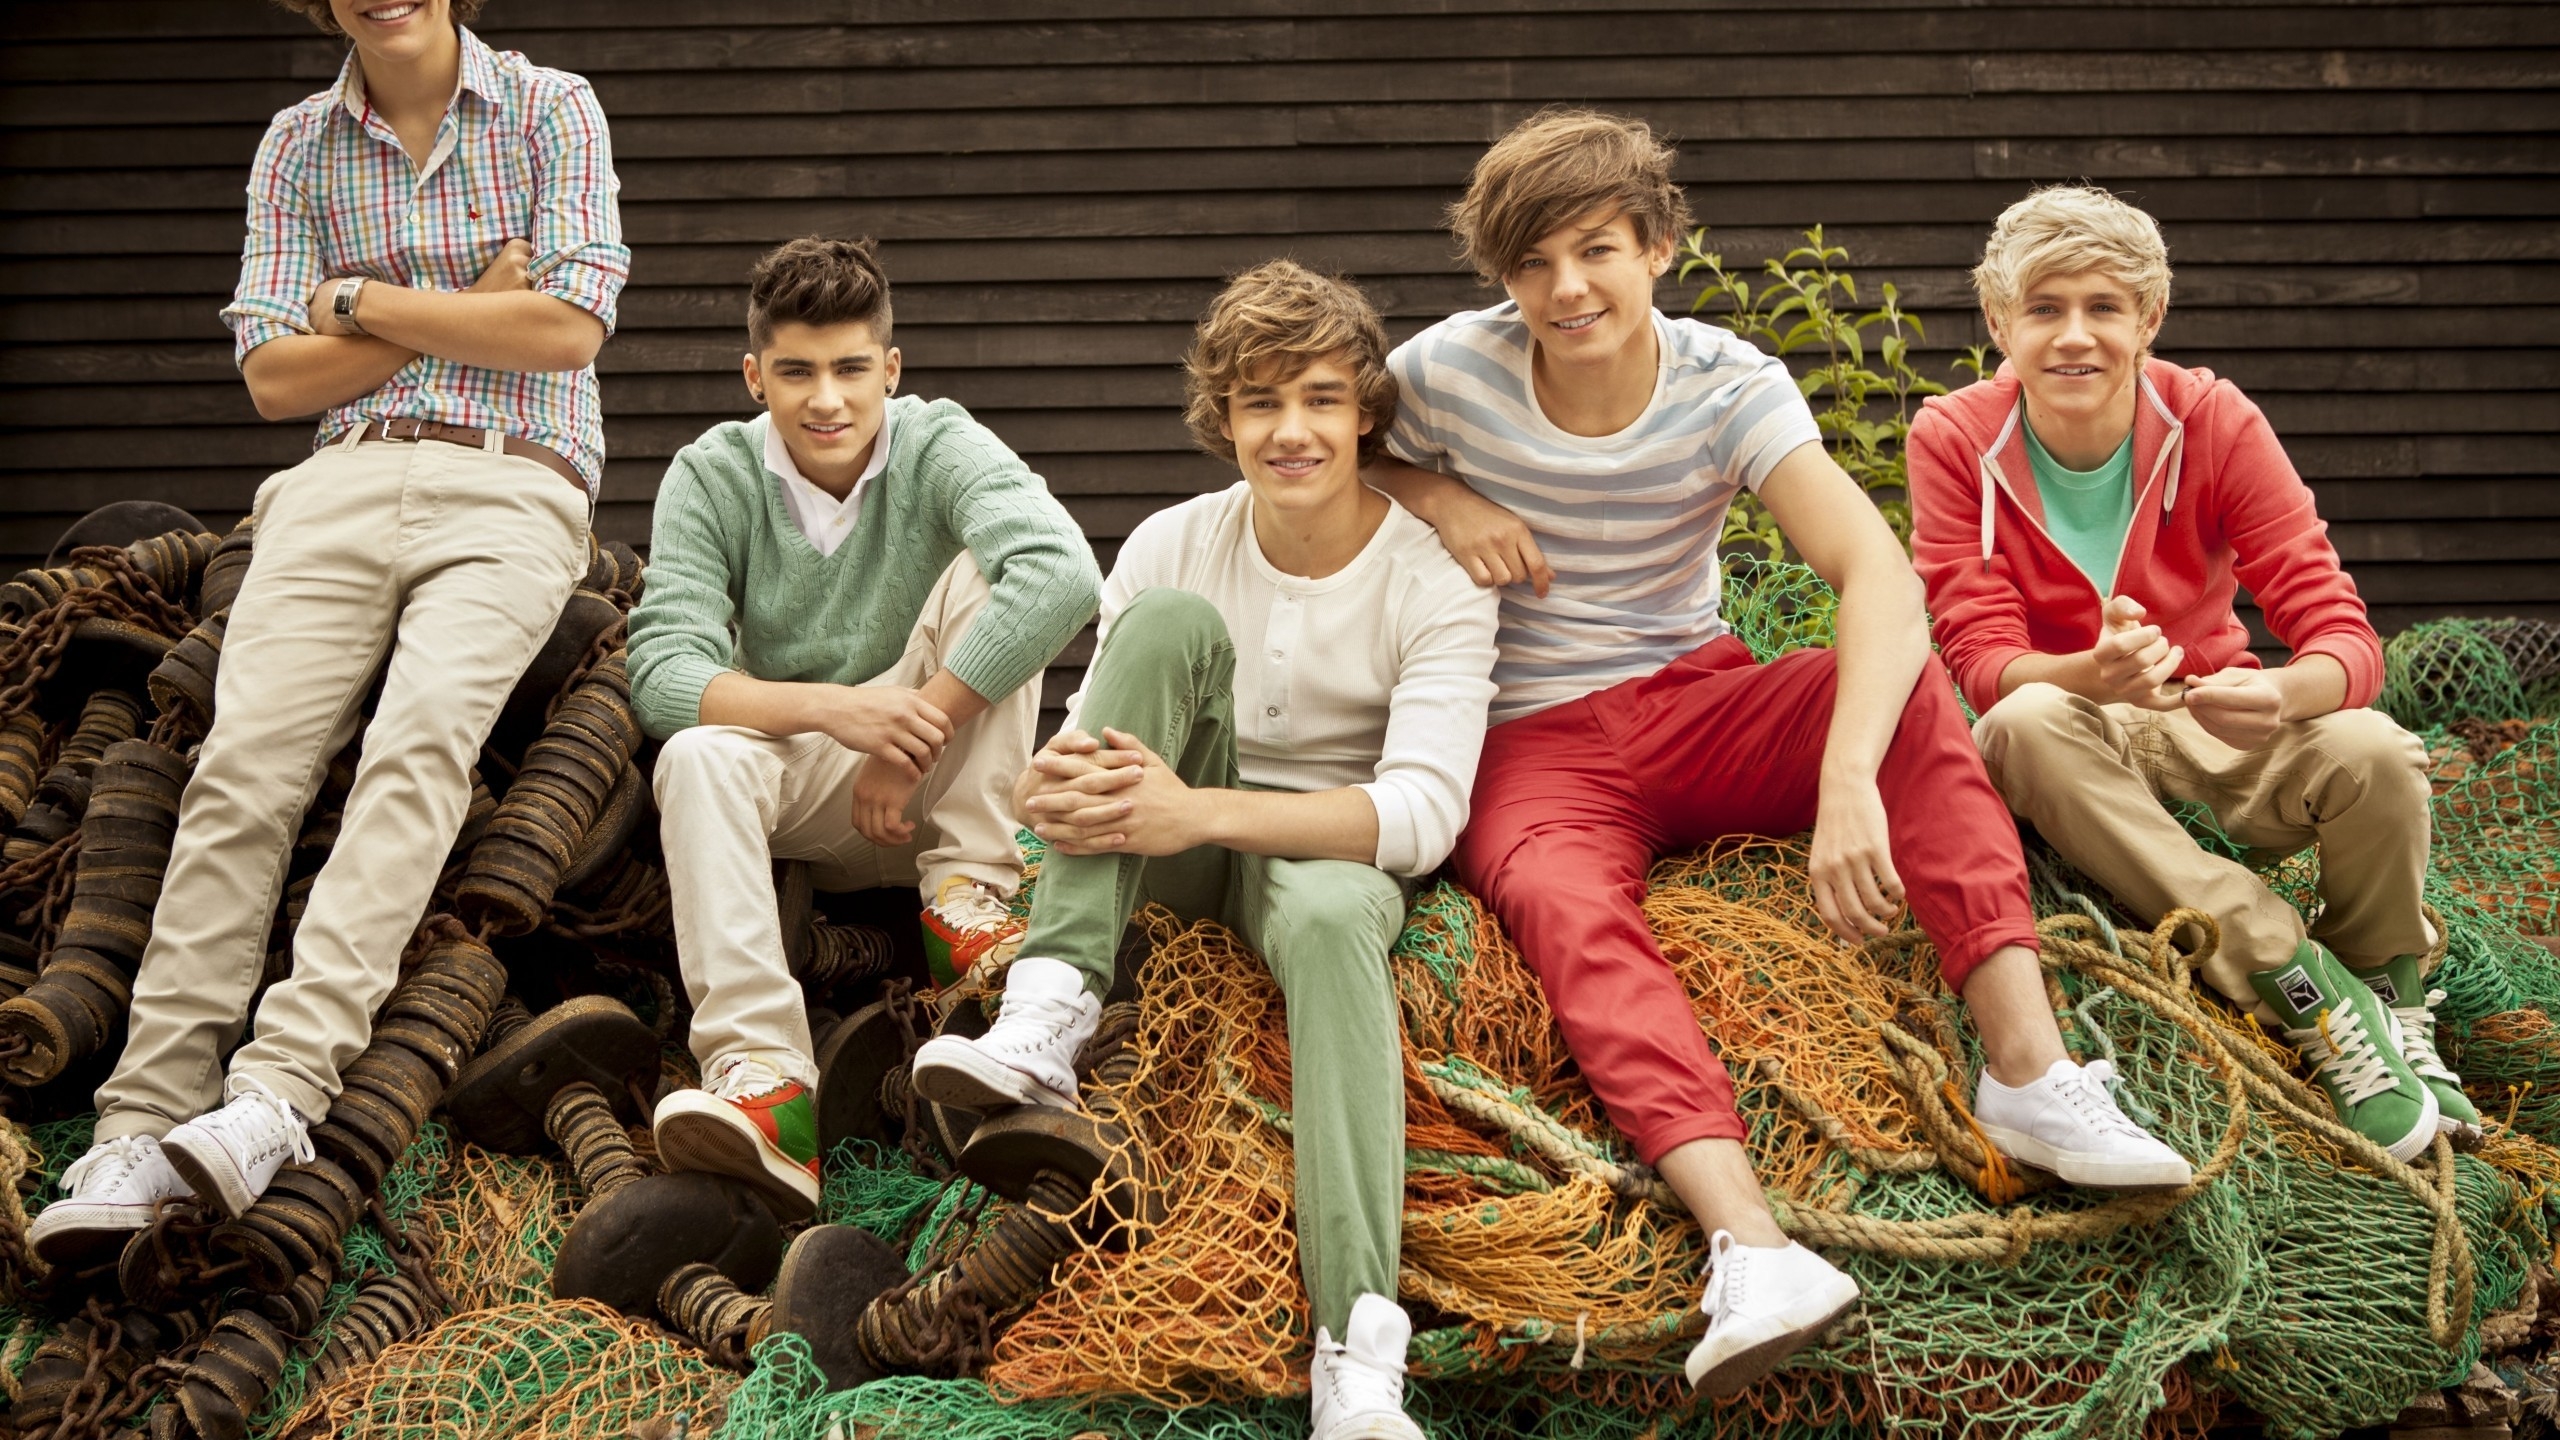 One Direction Poster for 2560x1440 HDTV resolution